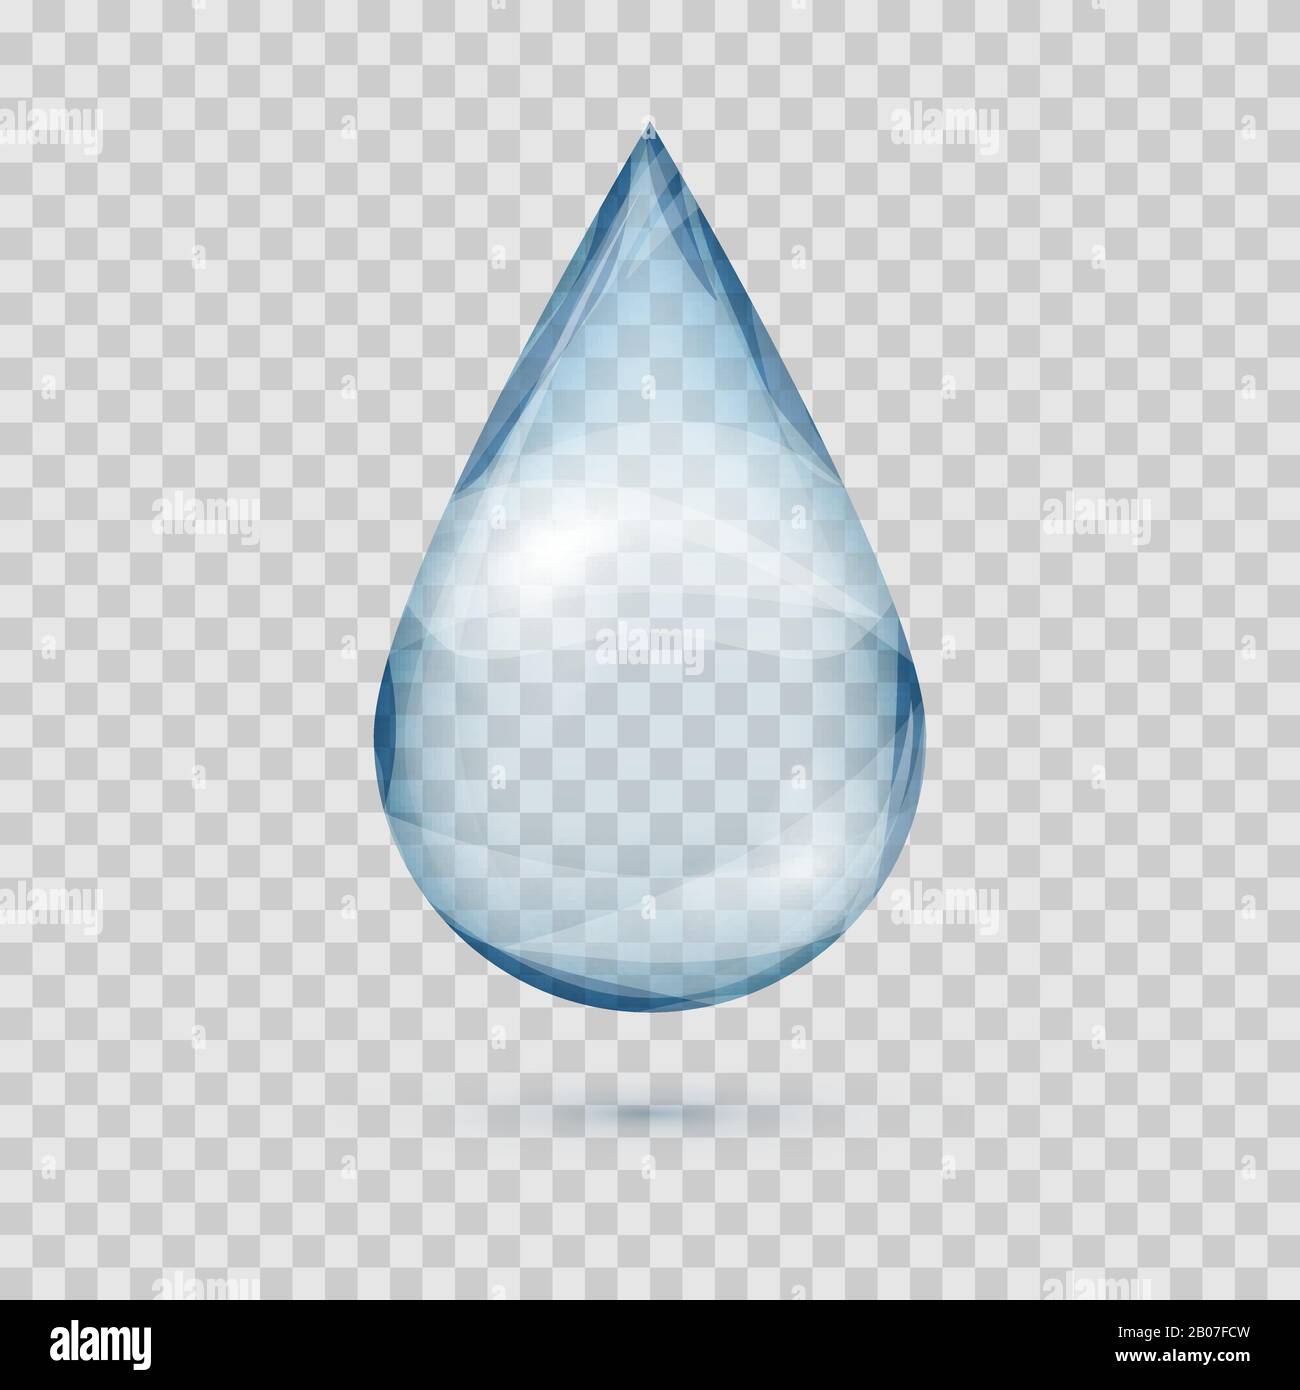 Falling transparent water drop vector isolated on a plaid background illustration Stock Vector